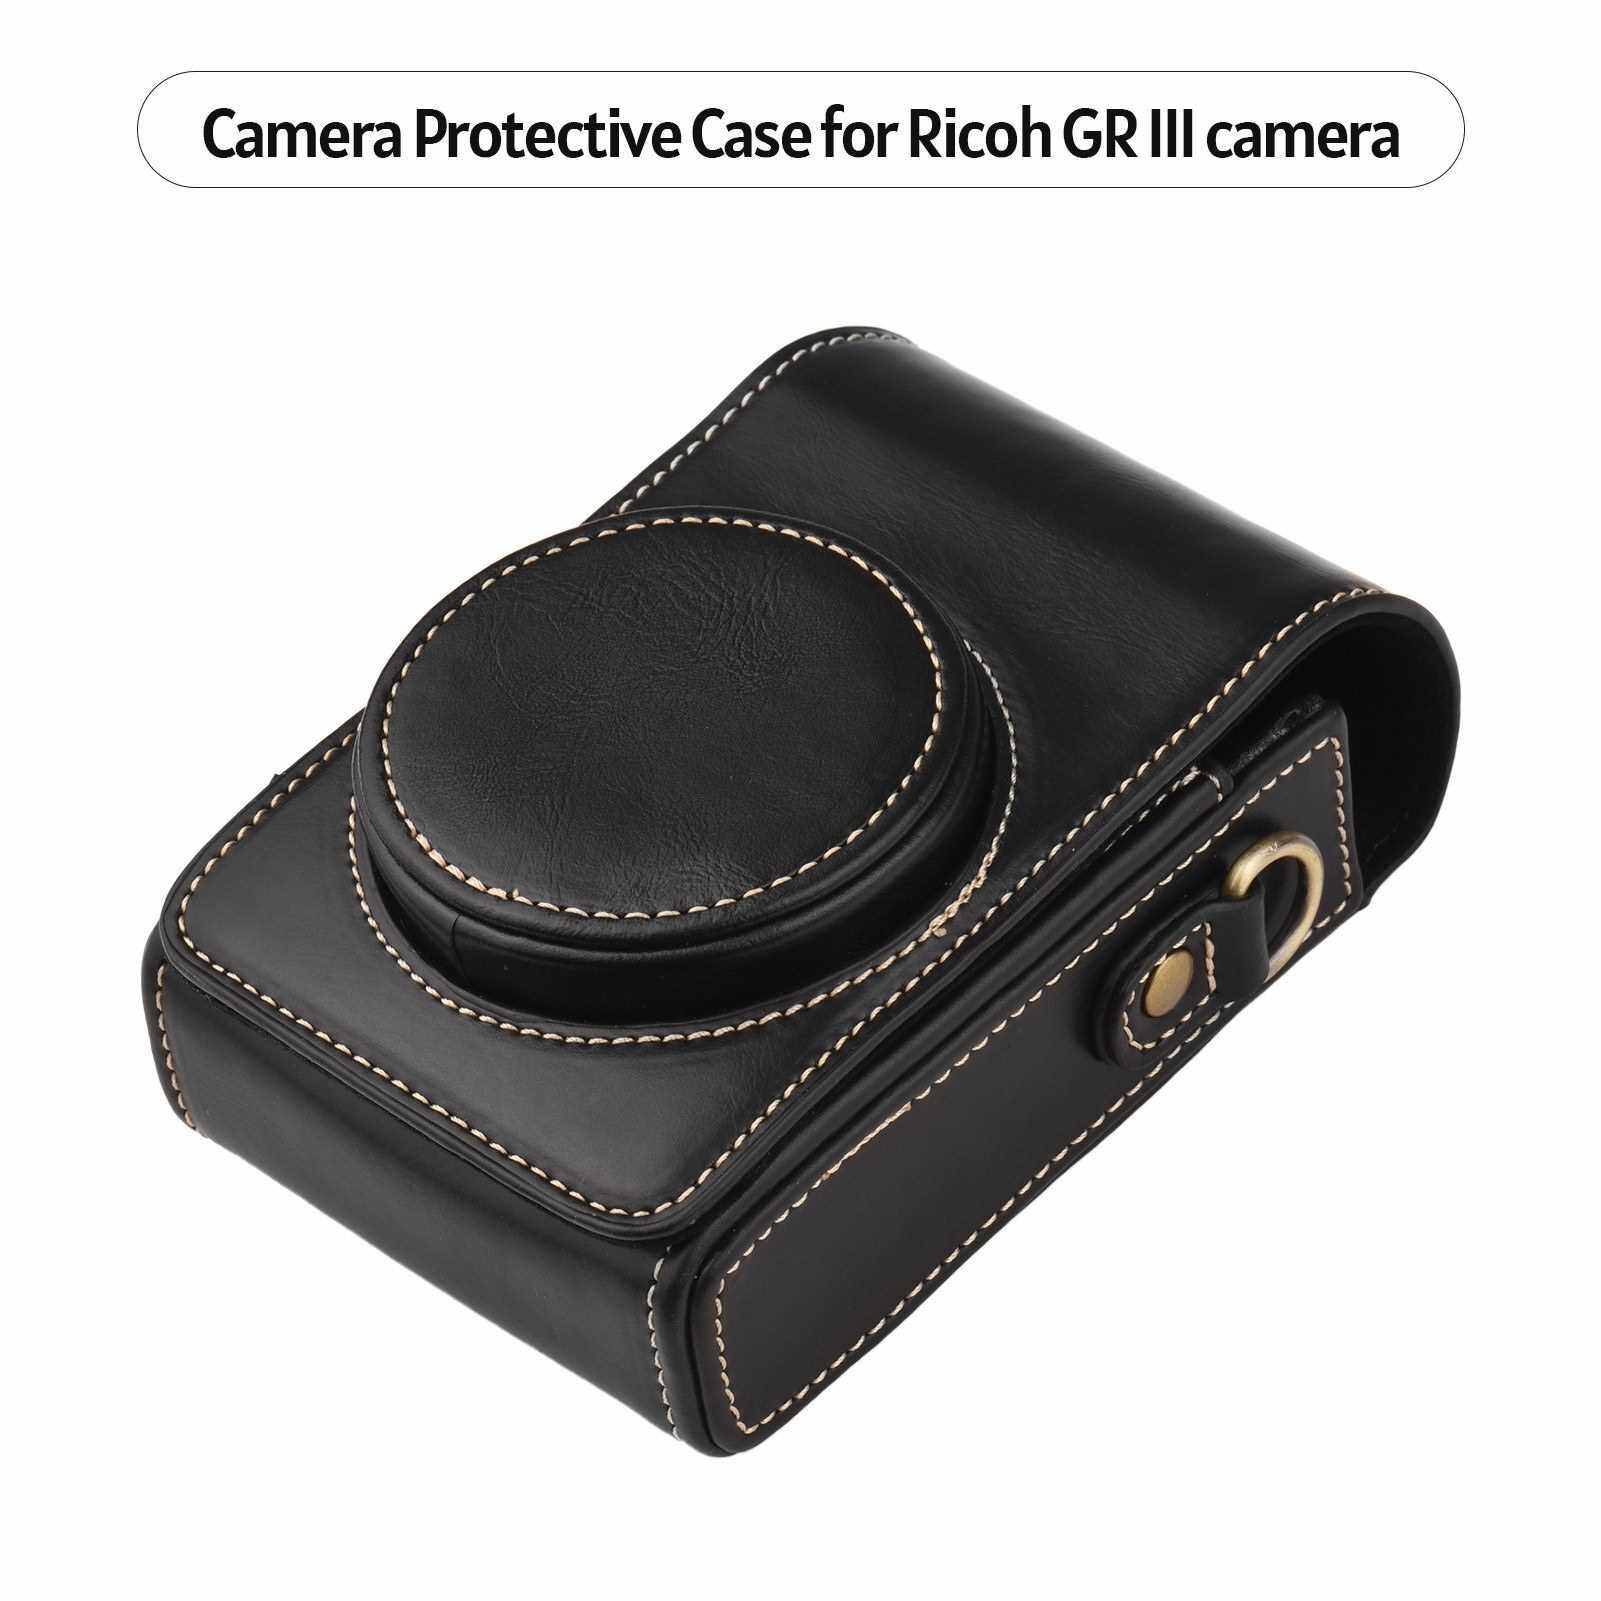 People's Choice Portable Camera Case Carry Bag Synthetic Leather with Shoulder Strap Replacement for Sony RX100/ RX100 II/ RX100 III/ RX100 IV/ RX100V/ RX100 VI/ RX100 VII/ ZV1 for Ricoh GR2/ GR3 (Black)